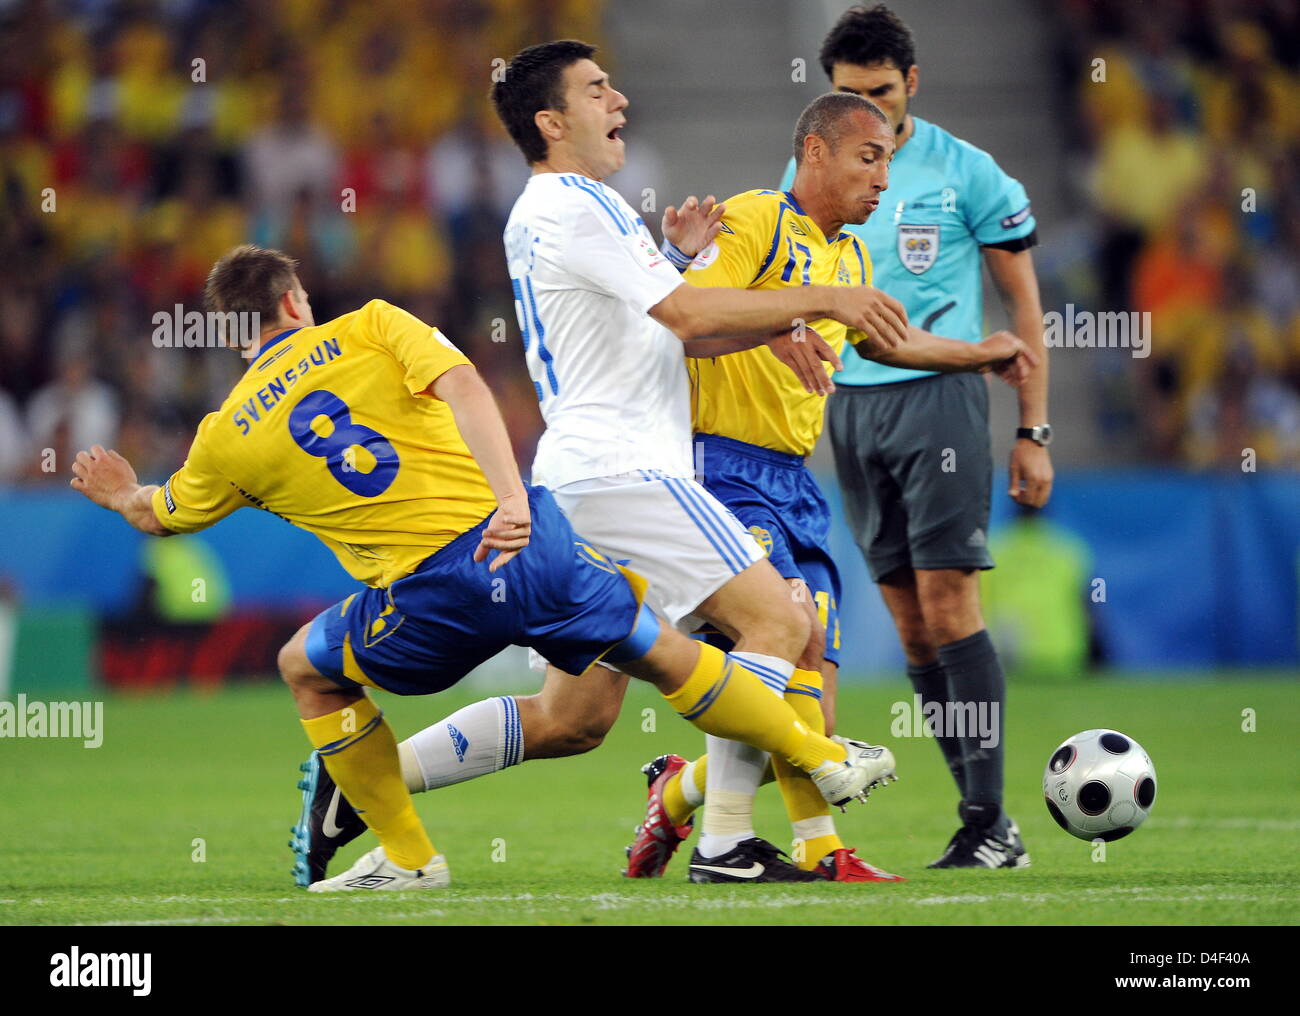 Kostas Katsouranis (C) of Greece gets sandwiched between Anders Svensson (L) and Henrik Larsson of Sweden during the EURO 2008 preliminary round group D match in Wals-Siezenheim Stadium, Salzburg, Austria, 10 June 2008. Swedish Captain Fredrik Ljungberg looks on. Photo: Achim Scheidemann dpa +please note UEFA restrictions particularly in regard to slide shows and 'No Mobile Service Stock Photo